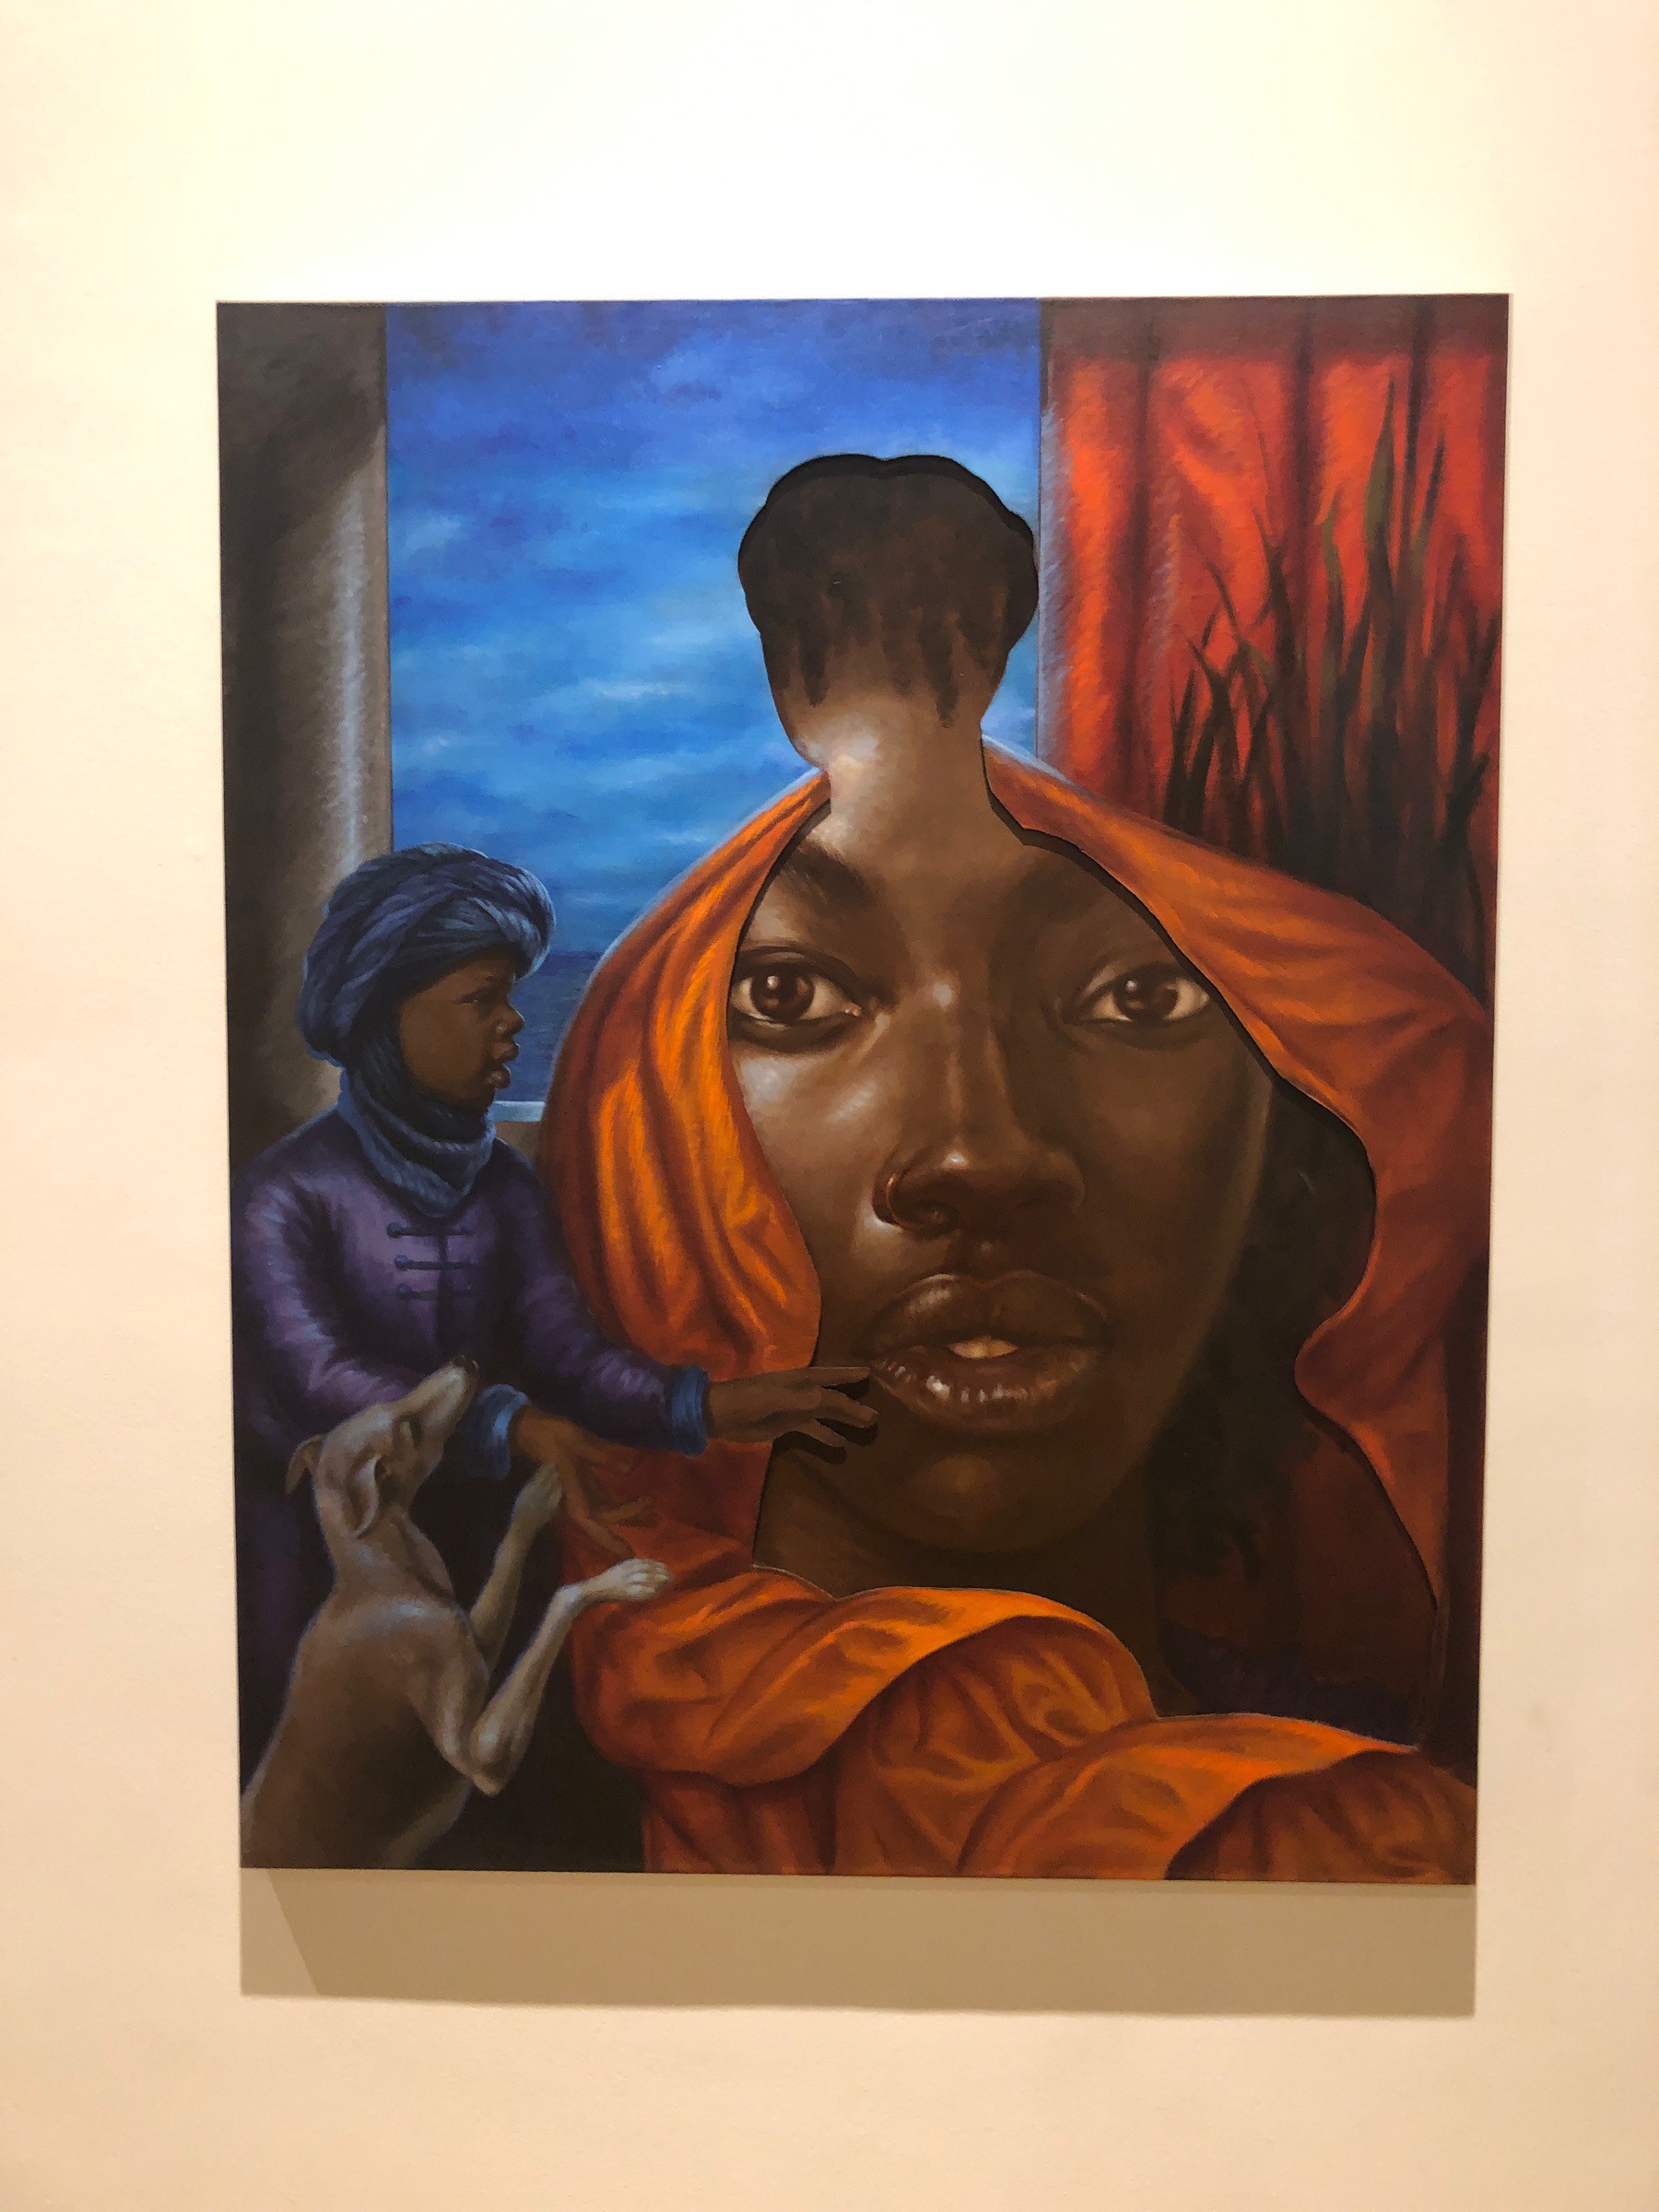 A 18th century painting of a white womam being waited upon by a black child slave. The white woman has been "cut" out of the painting and the void reveals s portrait of a black woman's face.